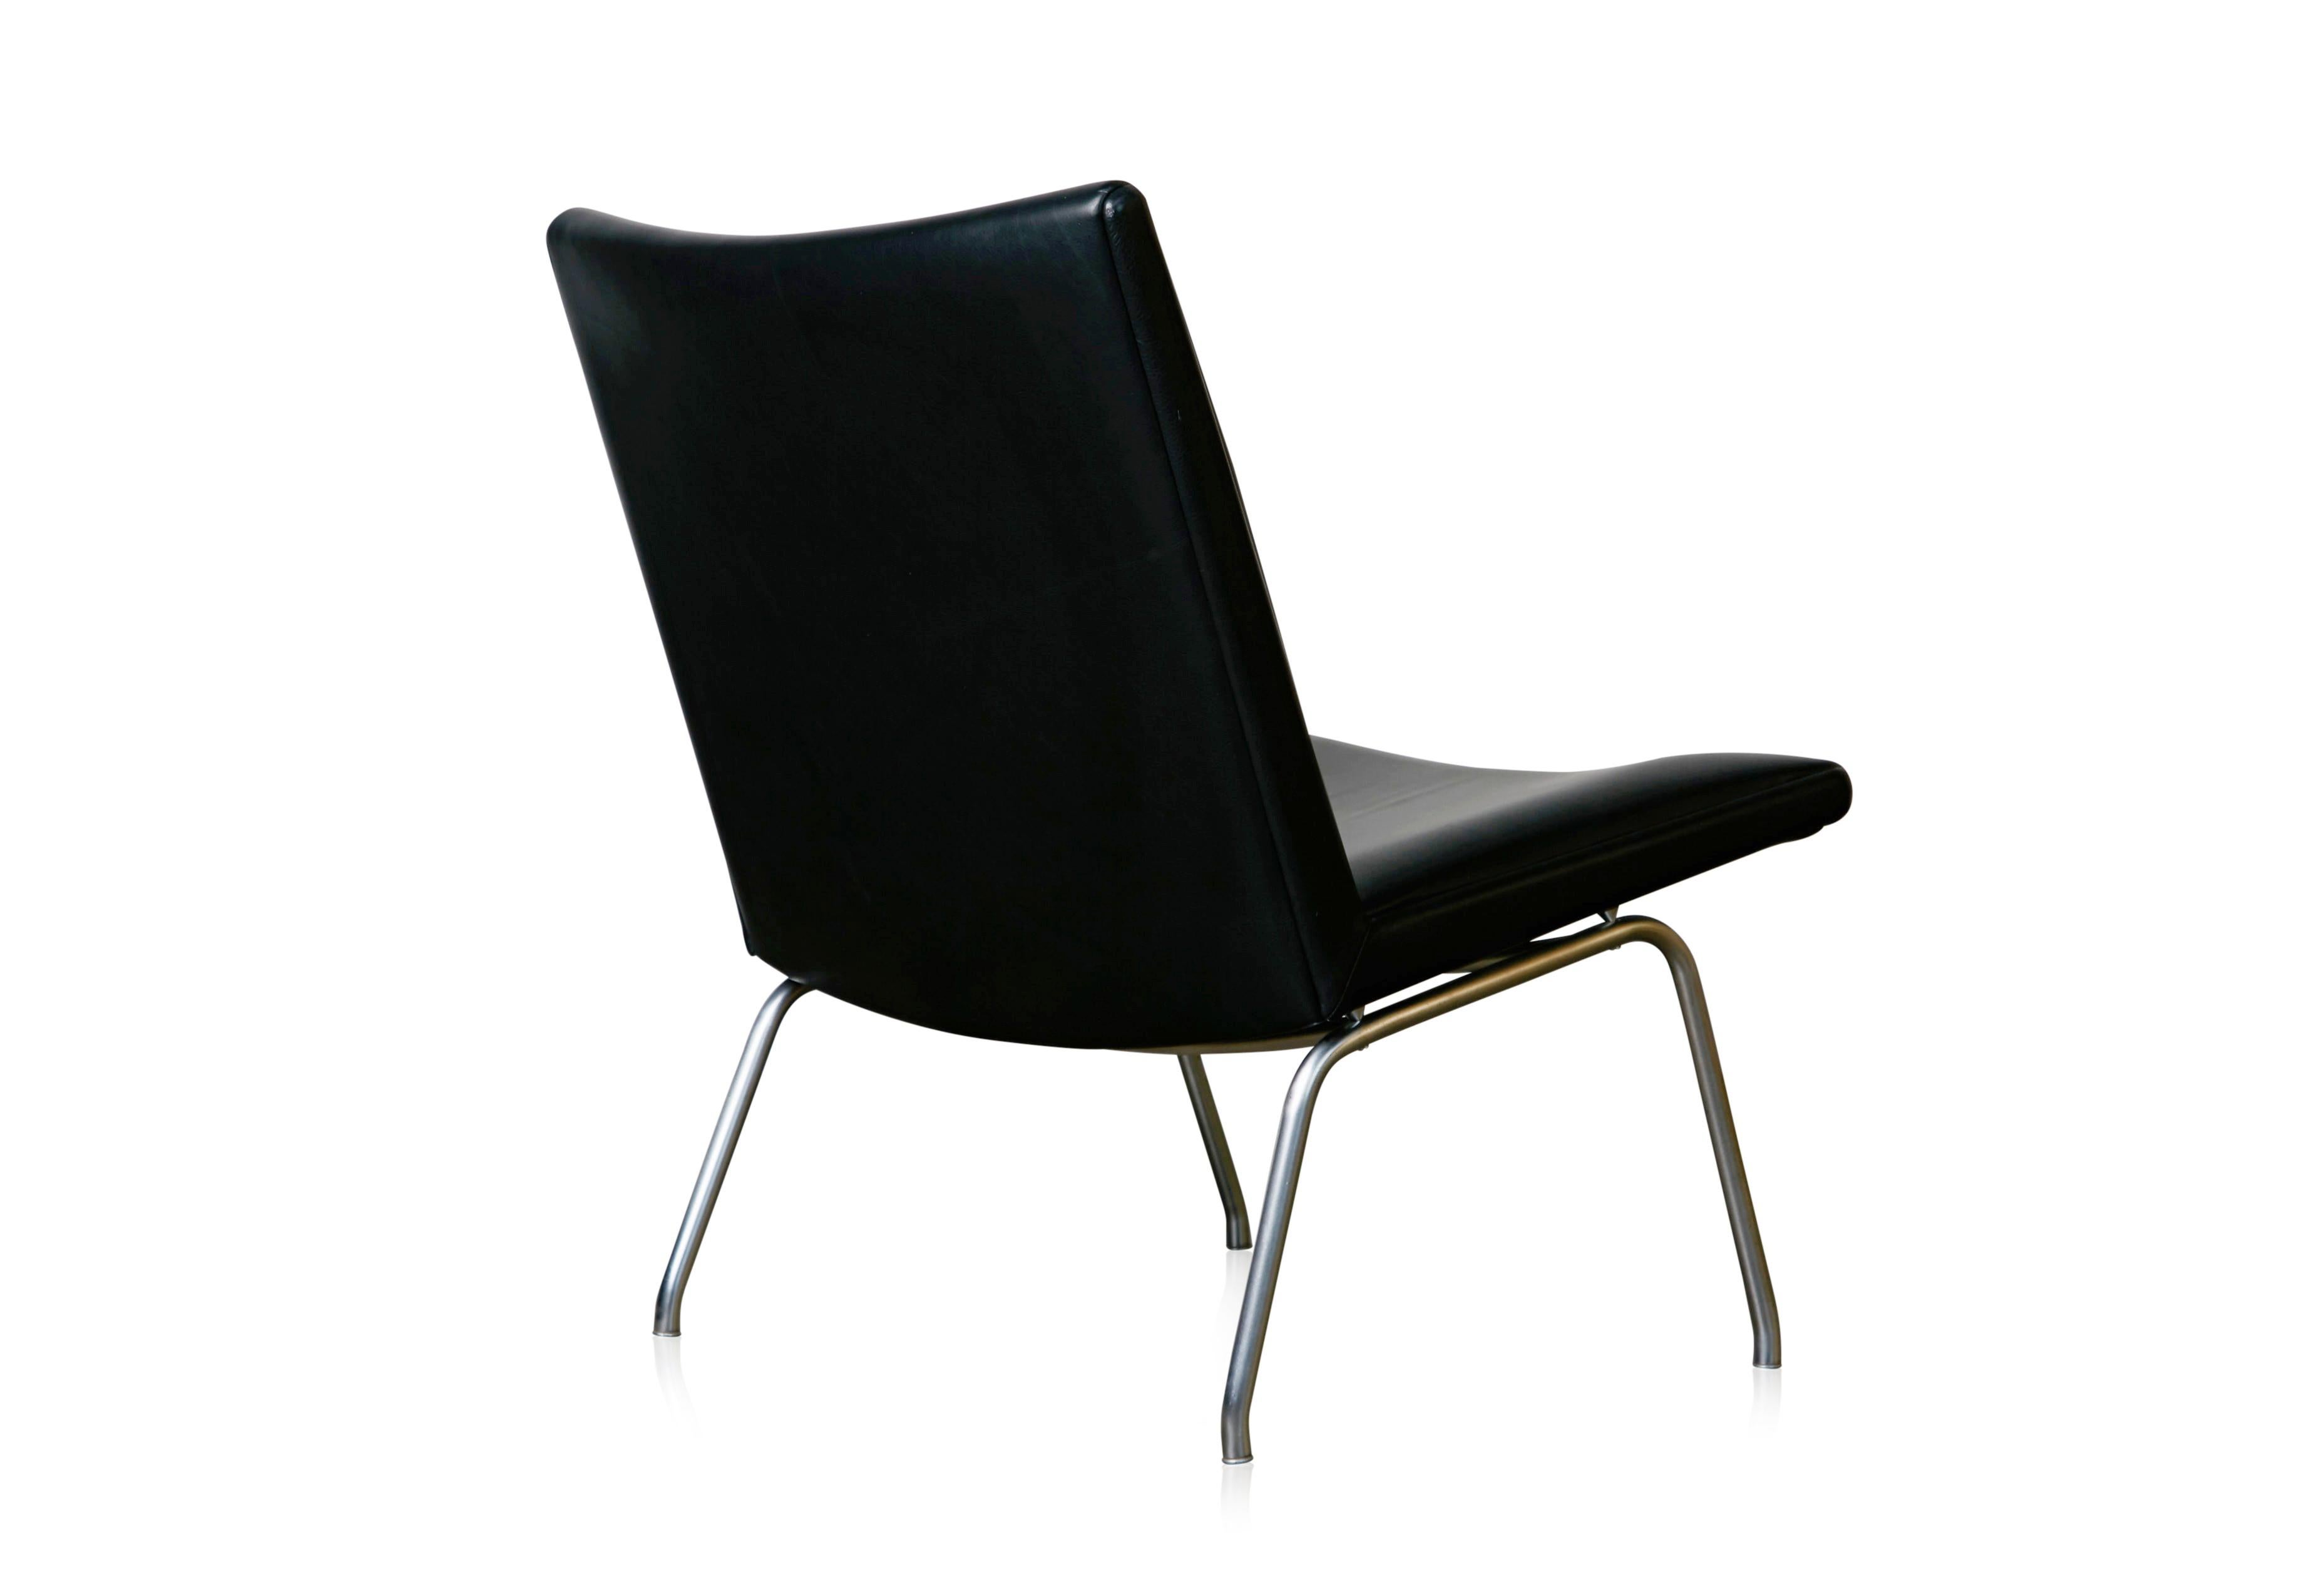 A classic design by Hans Wener for the Kastrup Airport in Copenhagen and produced by A.P. Stolen, this easy chair is covered in black leather sitting upon chrome plated steel frame. 

Another similar model, the AP-40, has steel side rails whereas